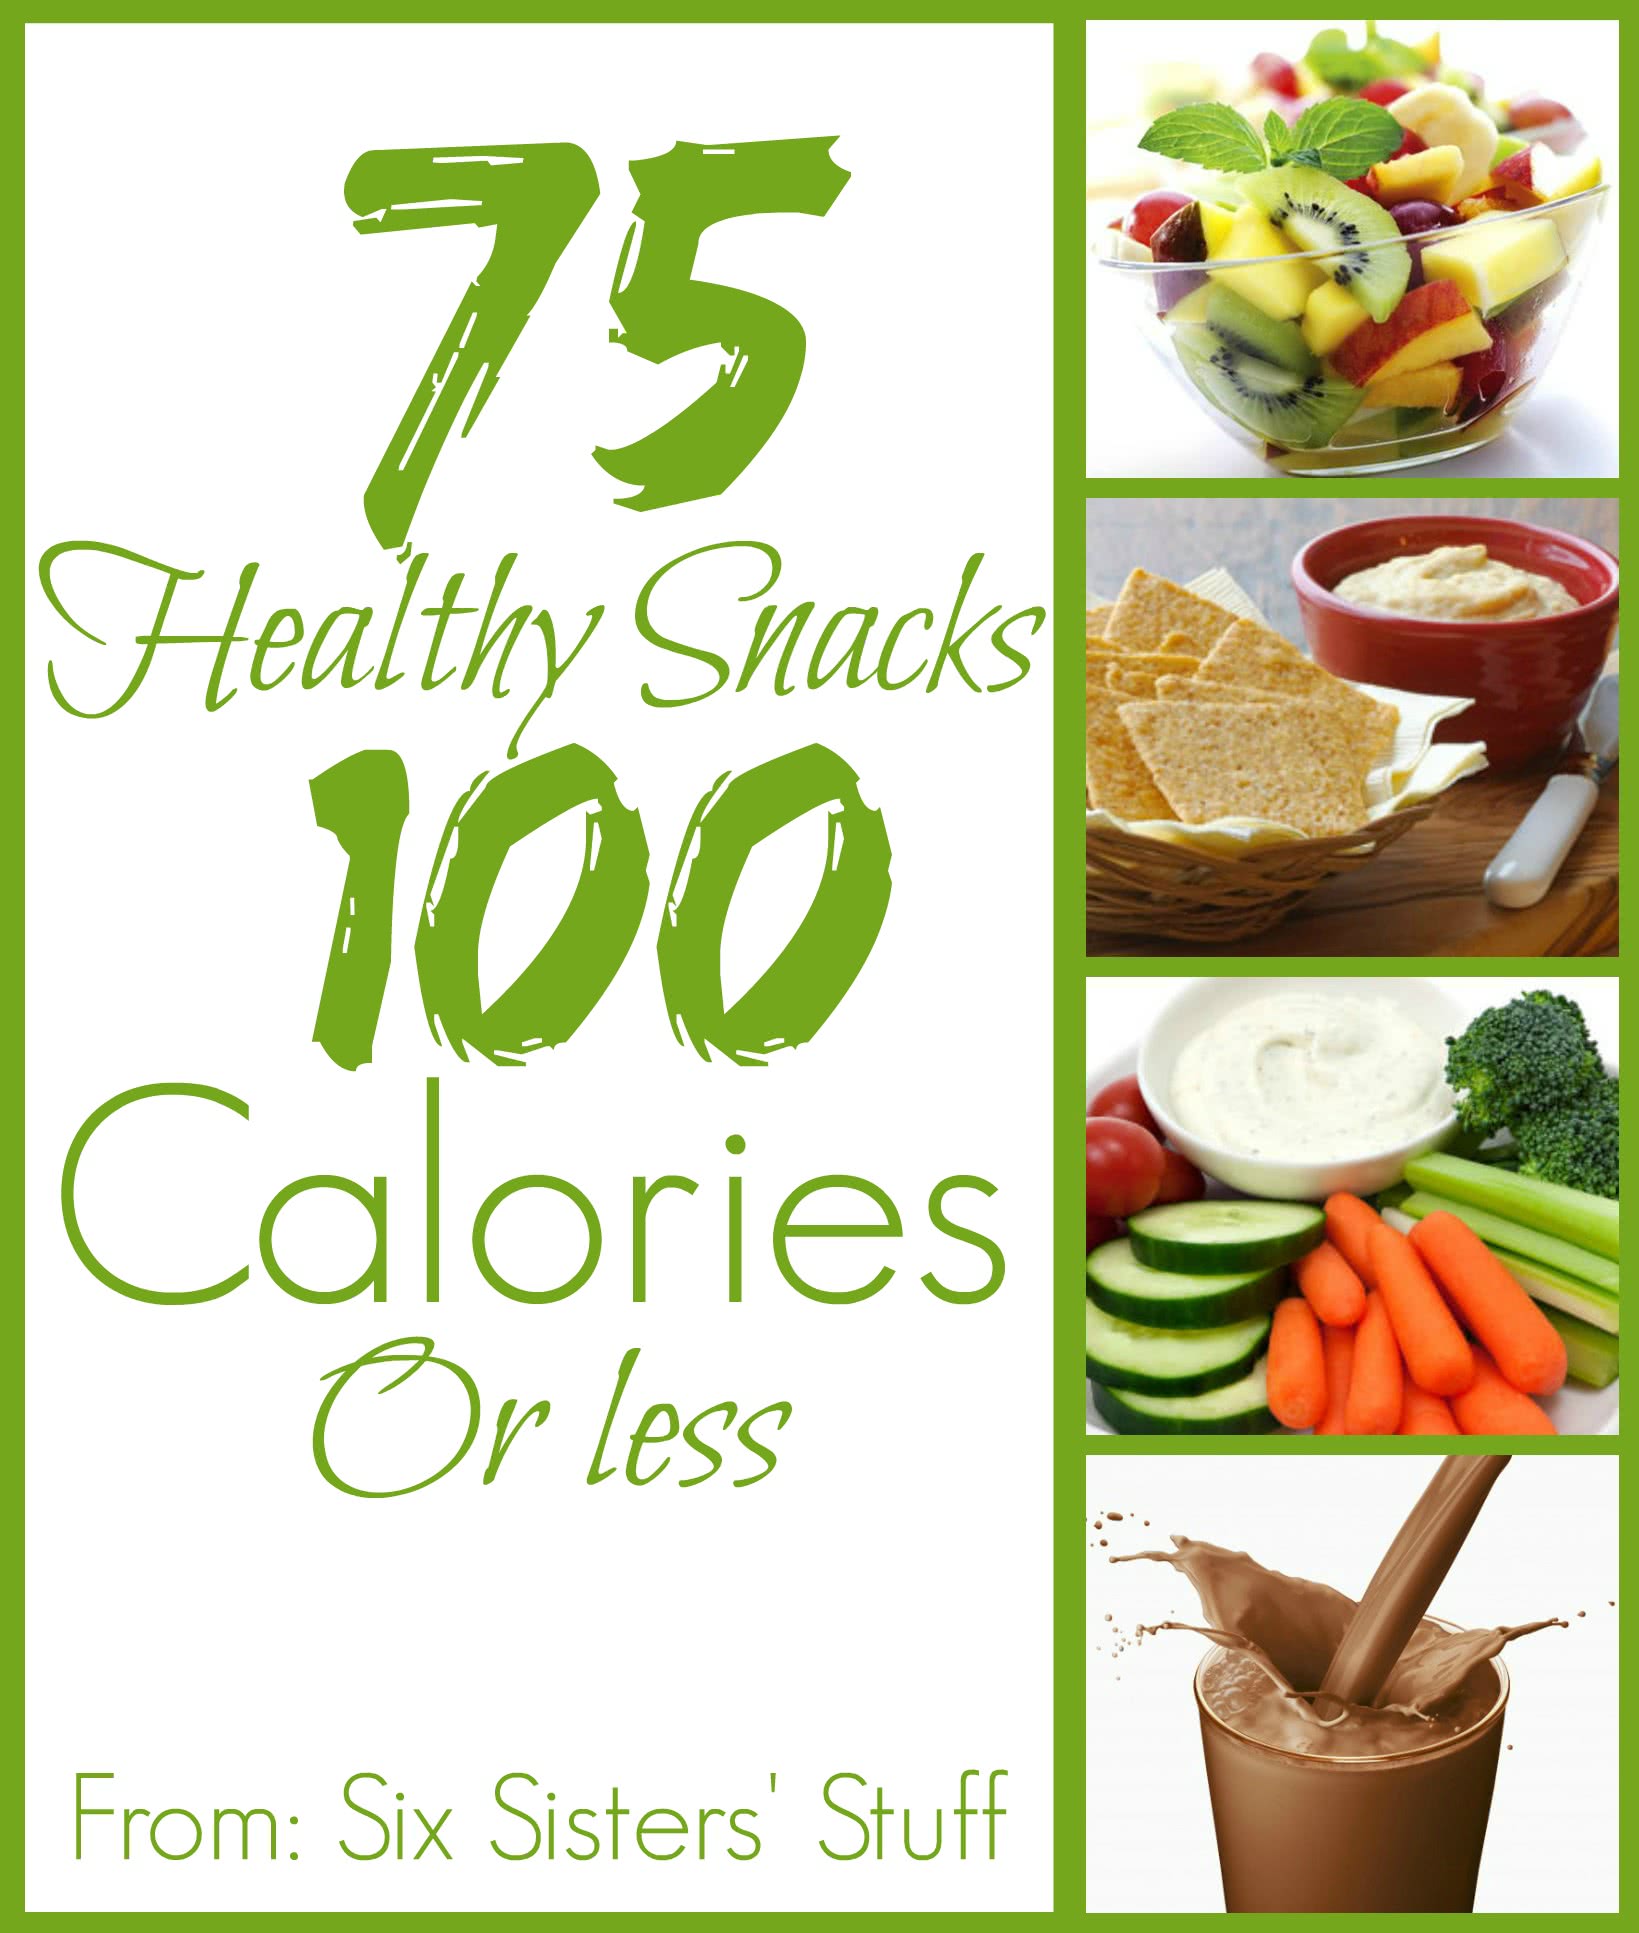 75 Healthy Snacks 100 Calories or Less